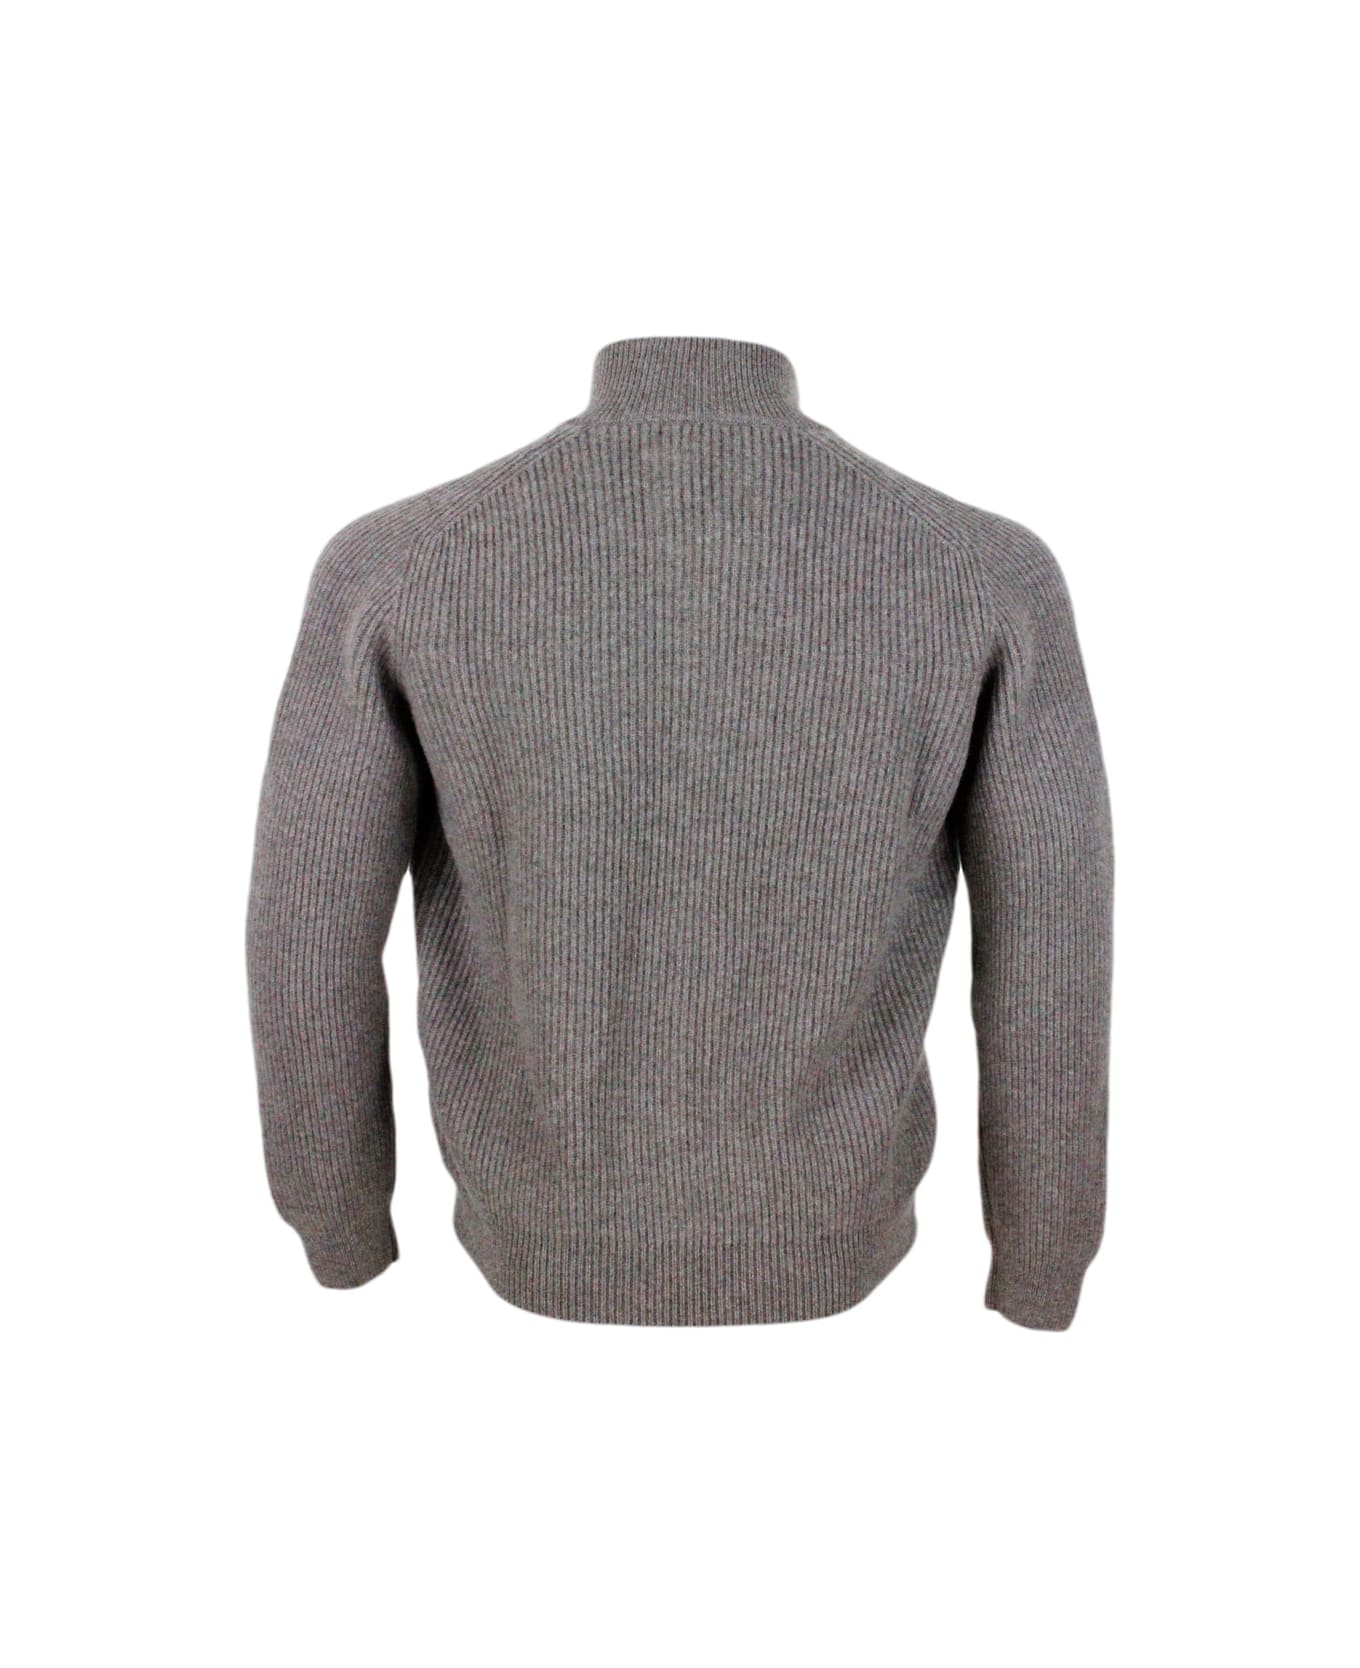 Barba Napoli Long-sleeved Full-zip Sweater In Soft And Fine Cashmere With Half English Rib Knit - Brown